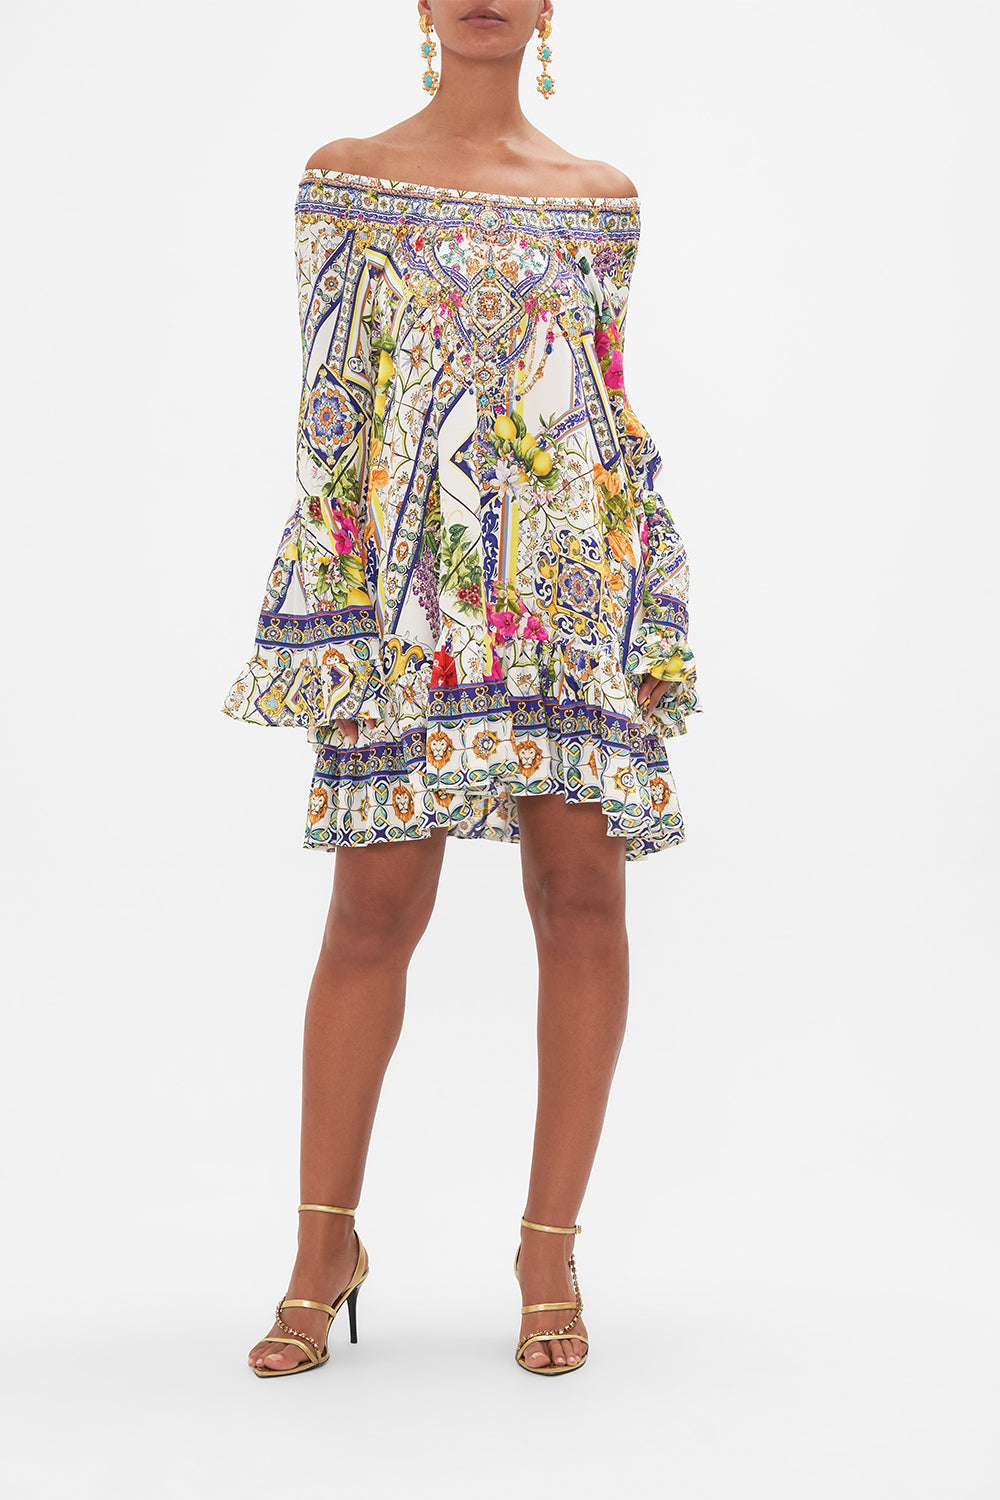 Front view of model wearing CAMILLA off shoulder dress in Amalfi Amore print